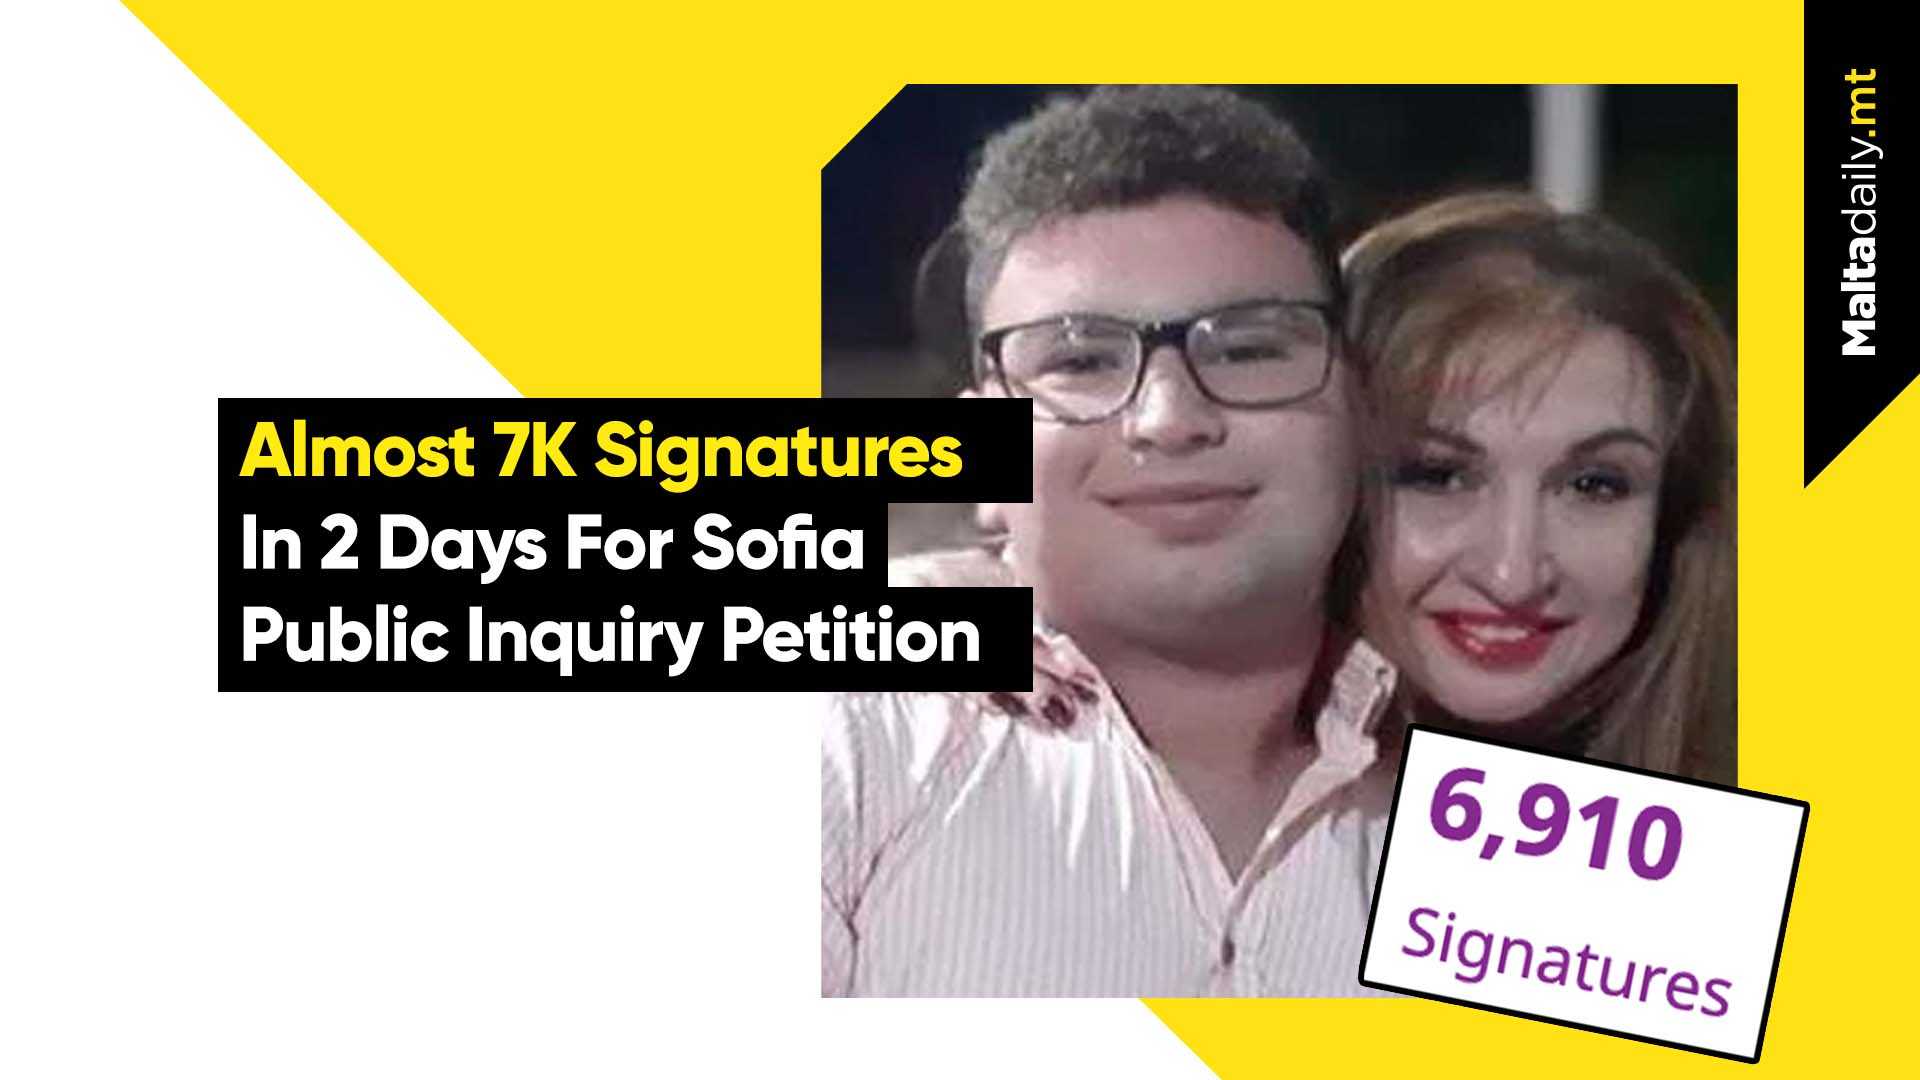 Almost 7K Signatures In 2 Days For Sofia Public Inquiry Petition